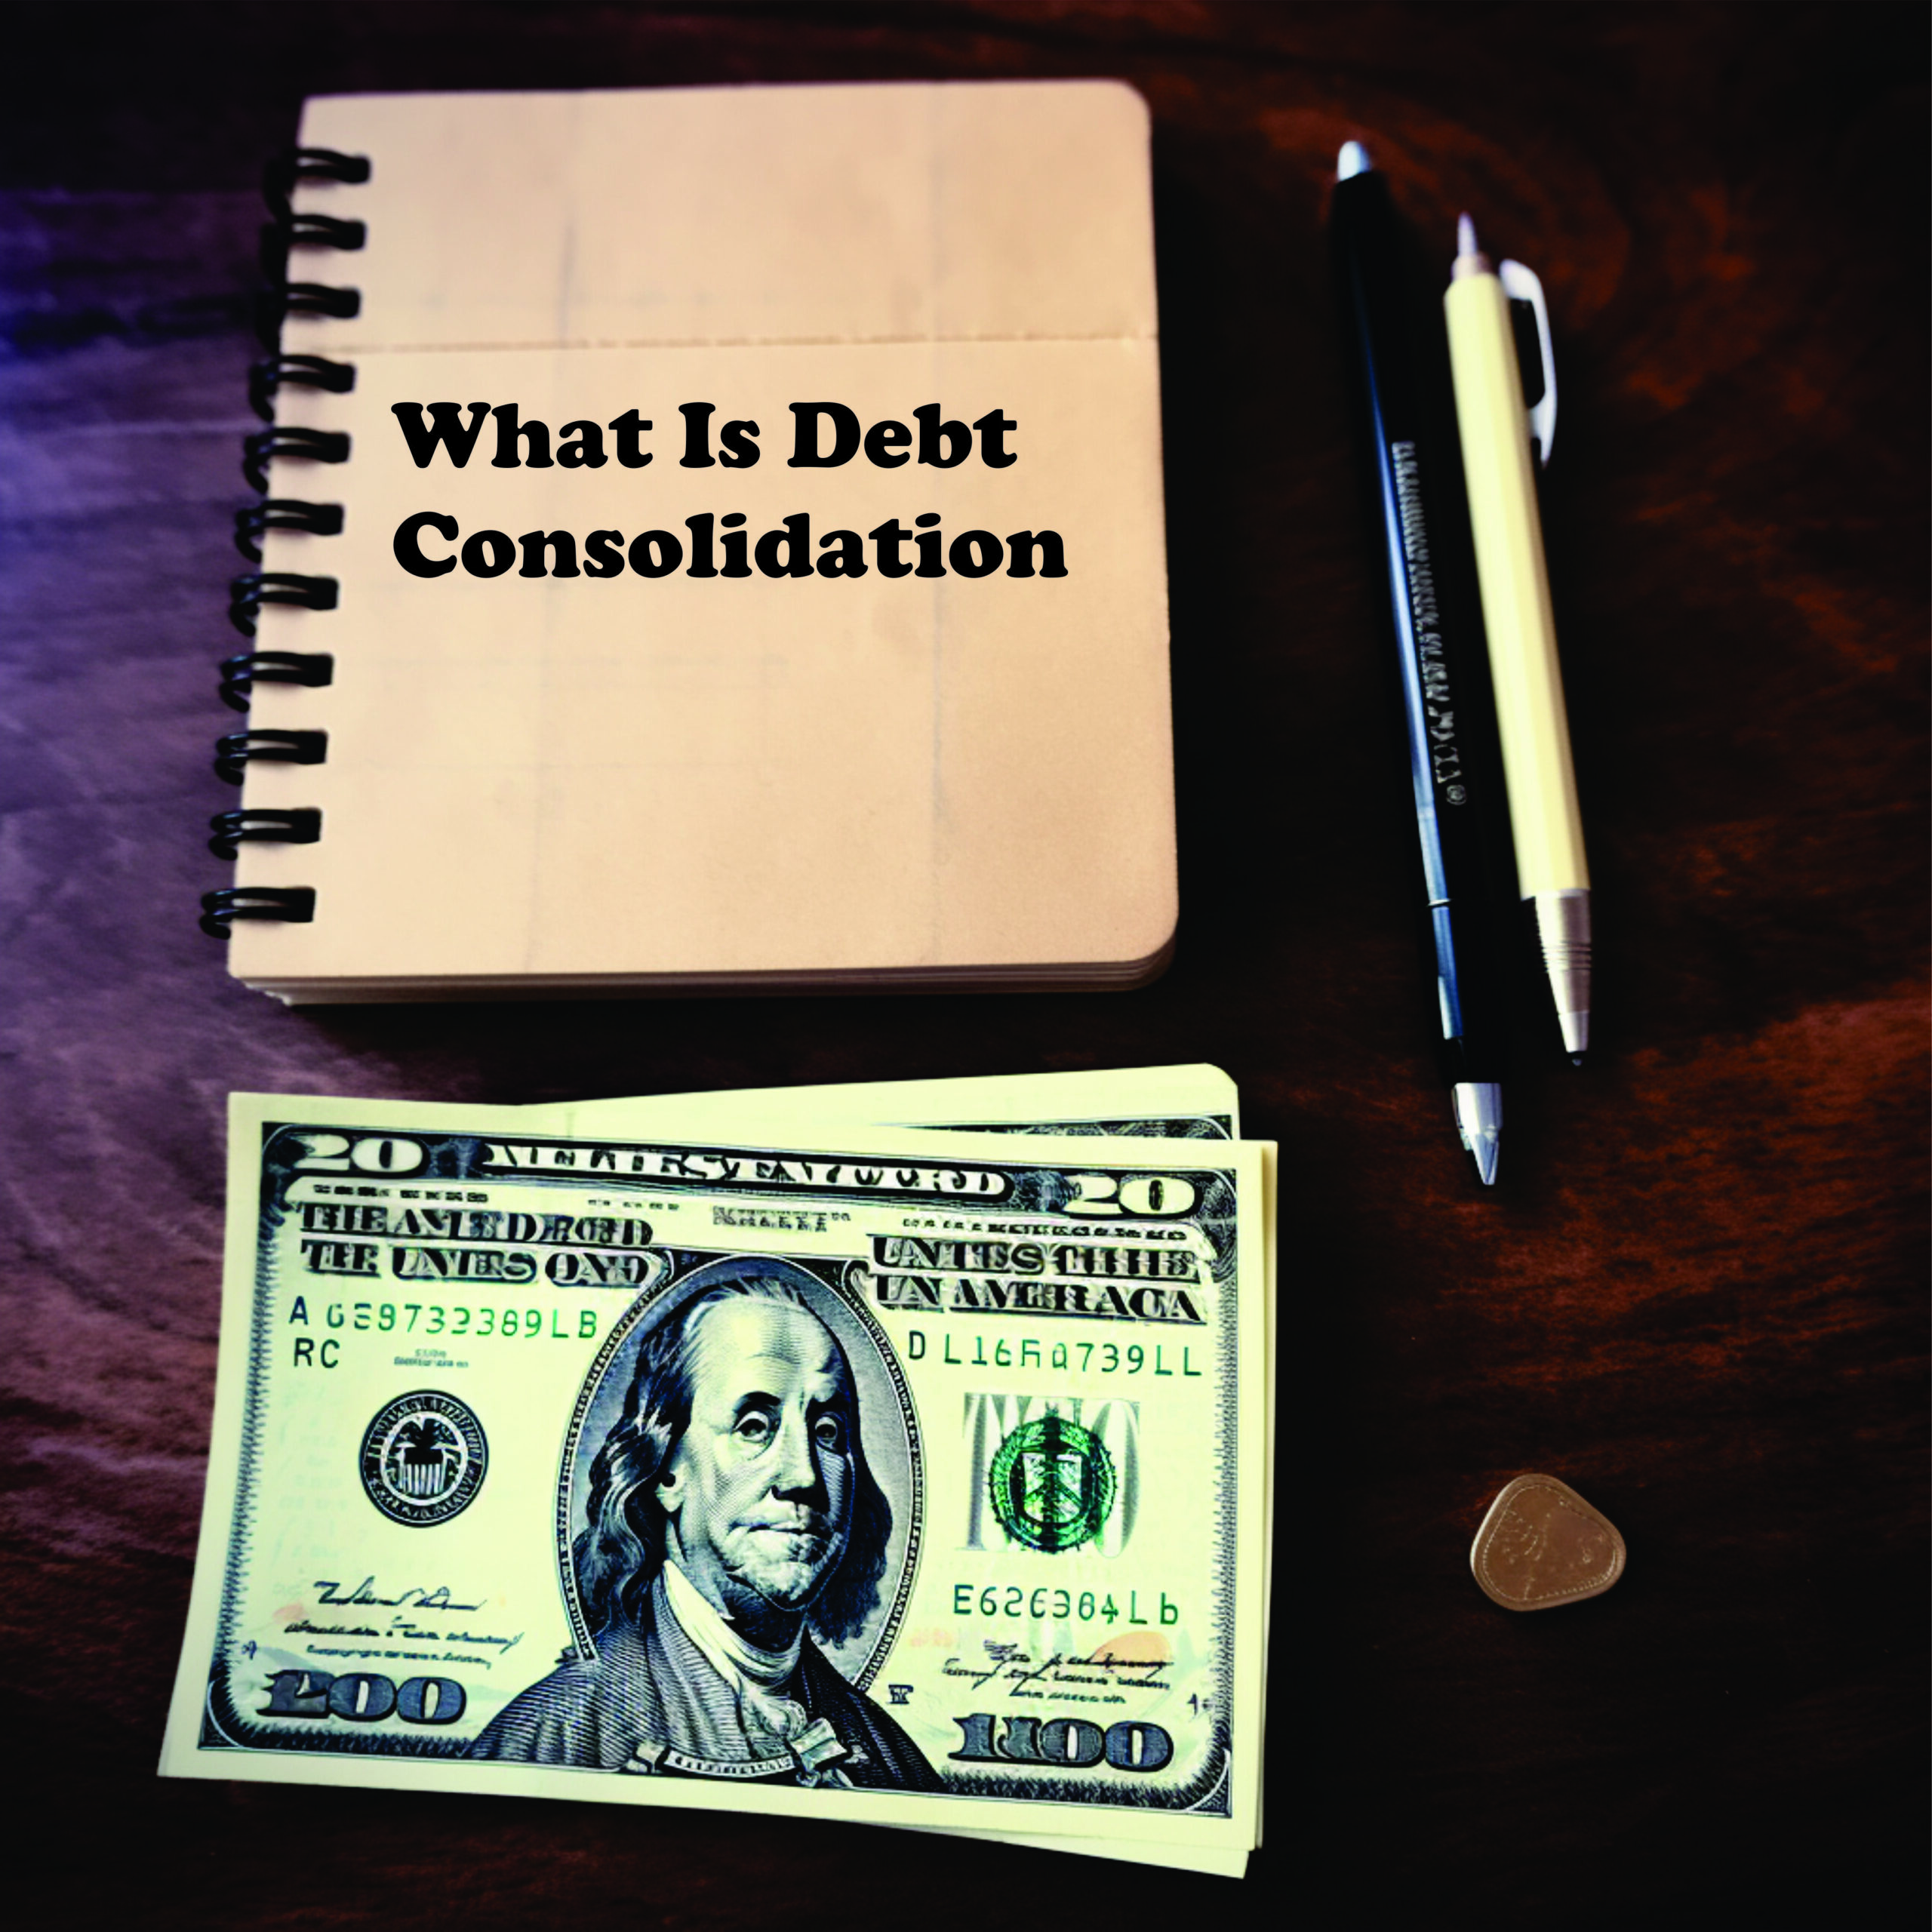 What Is Debt Consolidation